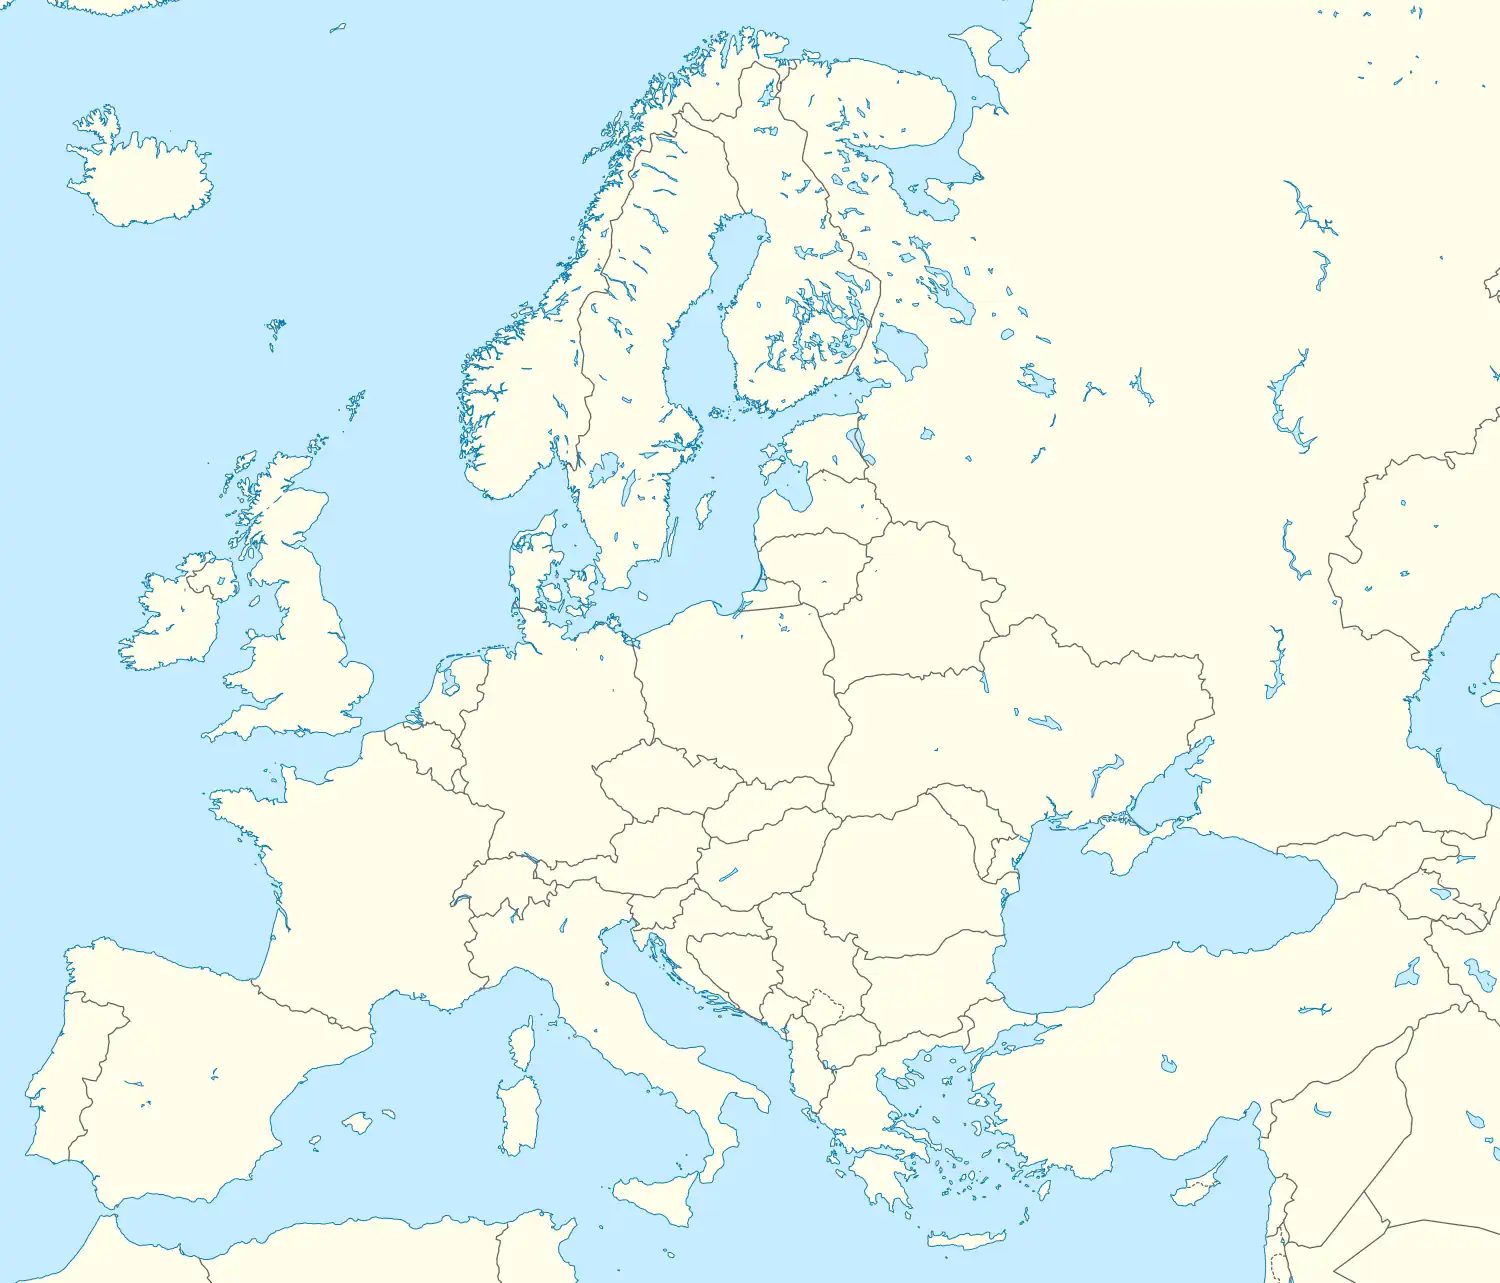 Cologne West is located in Europe